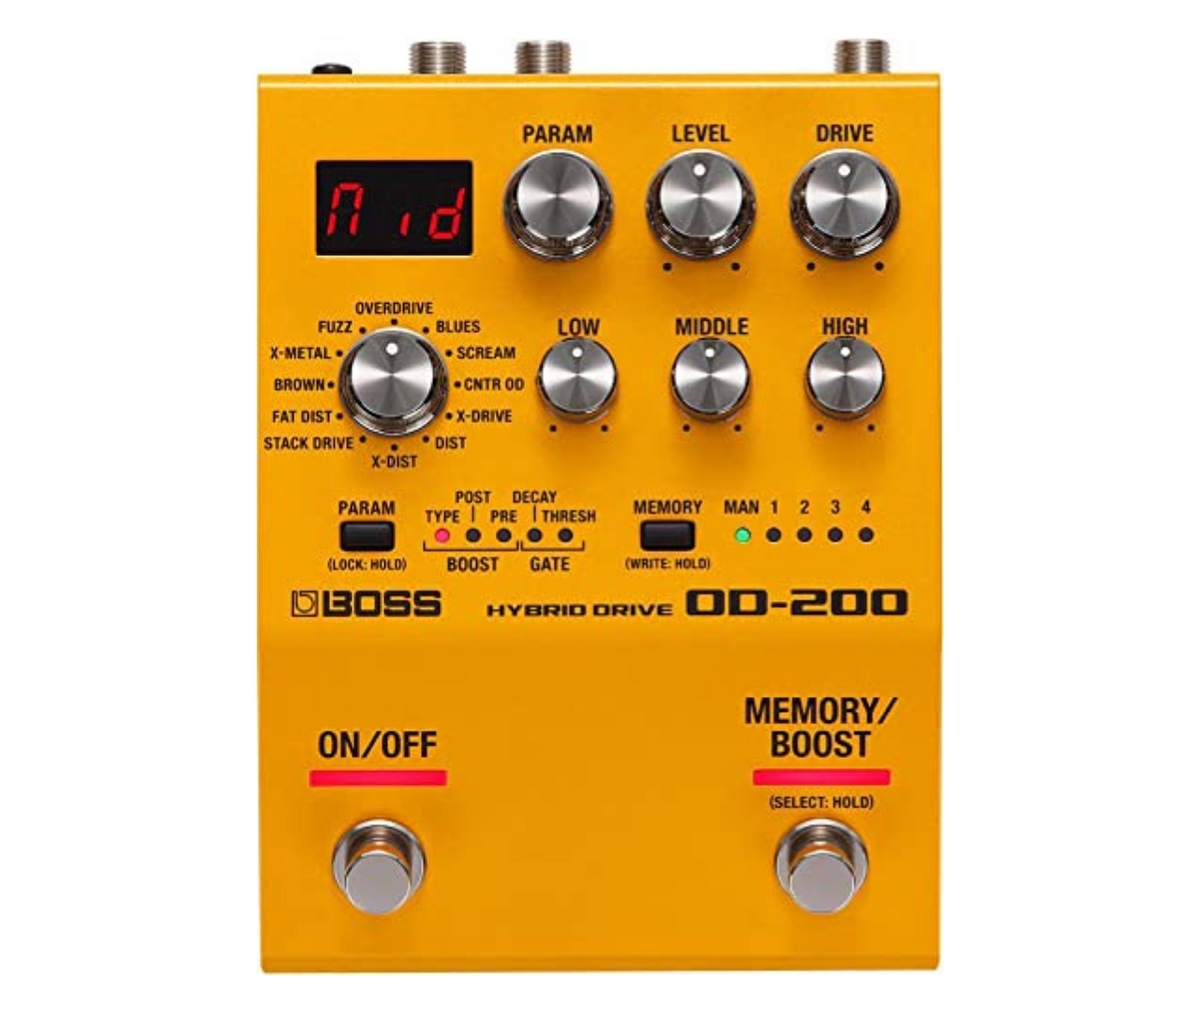 BOSS OD-200 Hybrid Drive Best Guitar Effects Pedal Hybrid Analog/Digital Circuit with 12 Drive Modes and 15 Boost Types